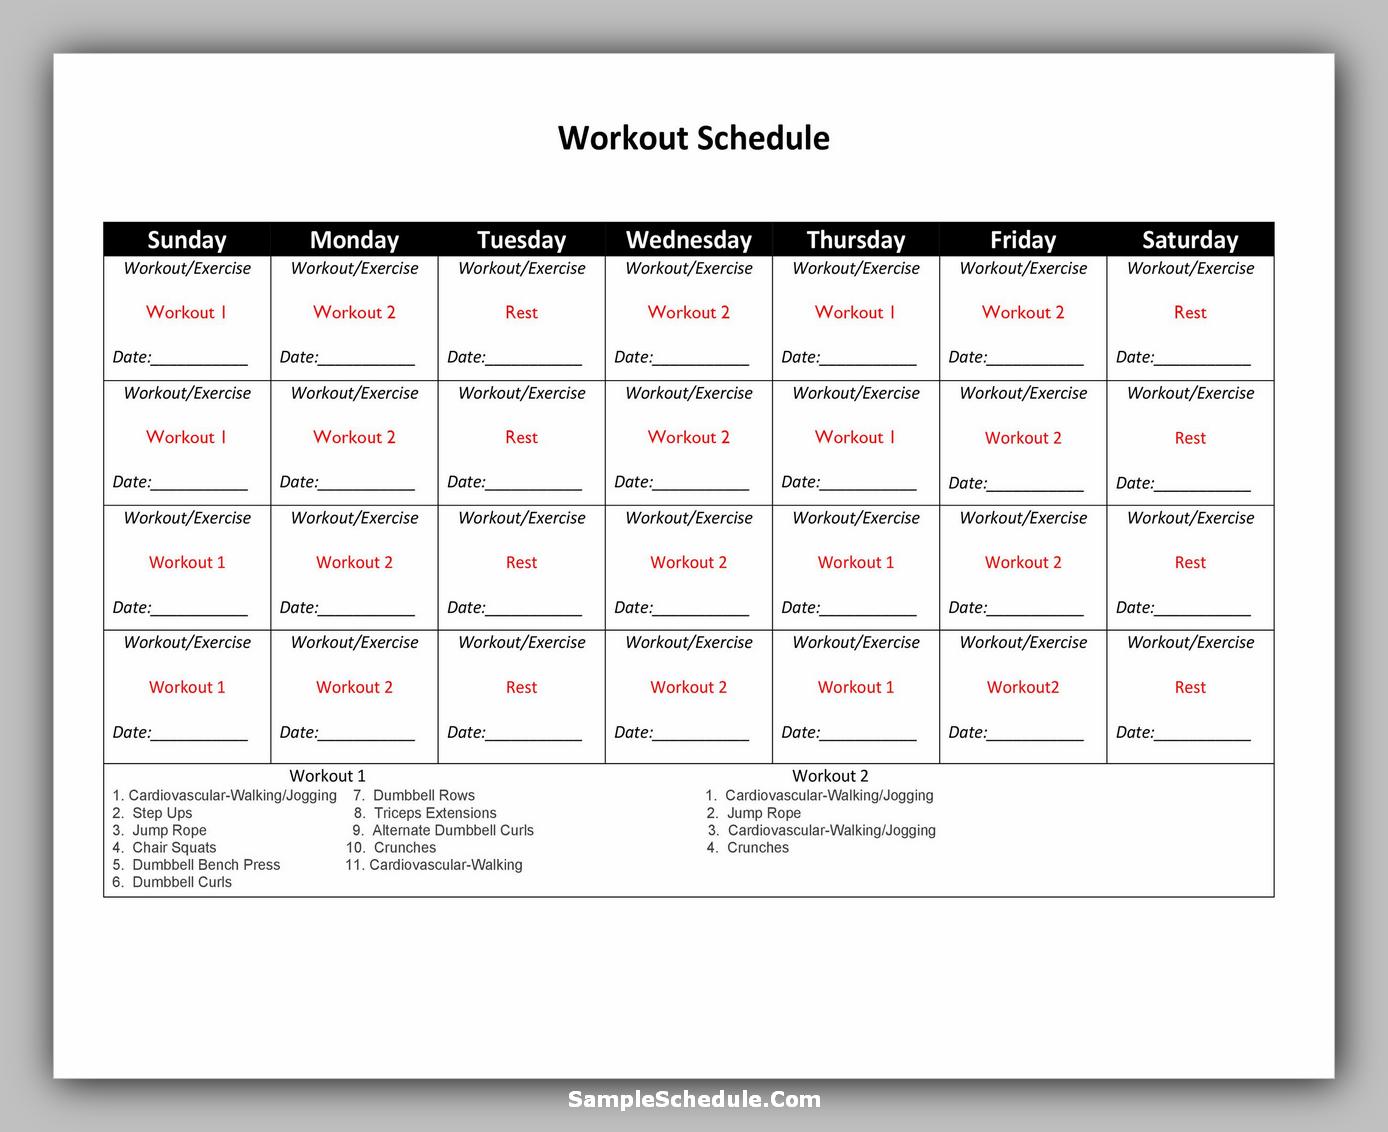 44 Workout Schedule Template & Tips to find it sample schedule